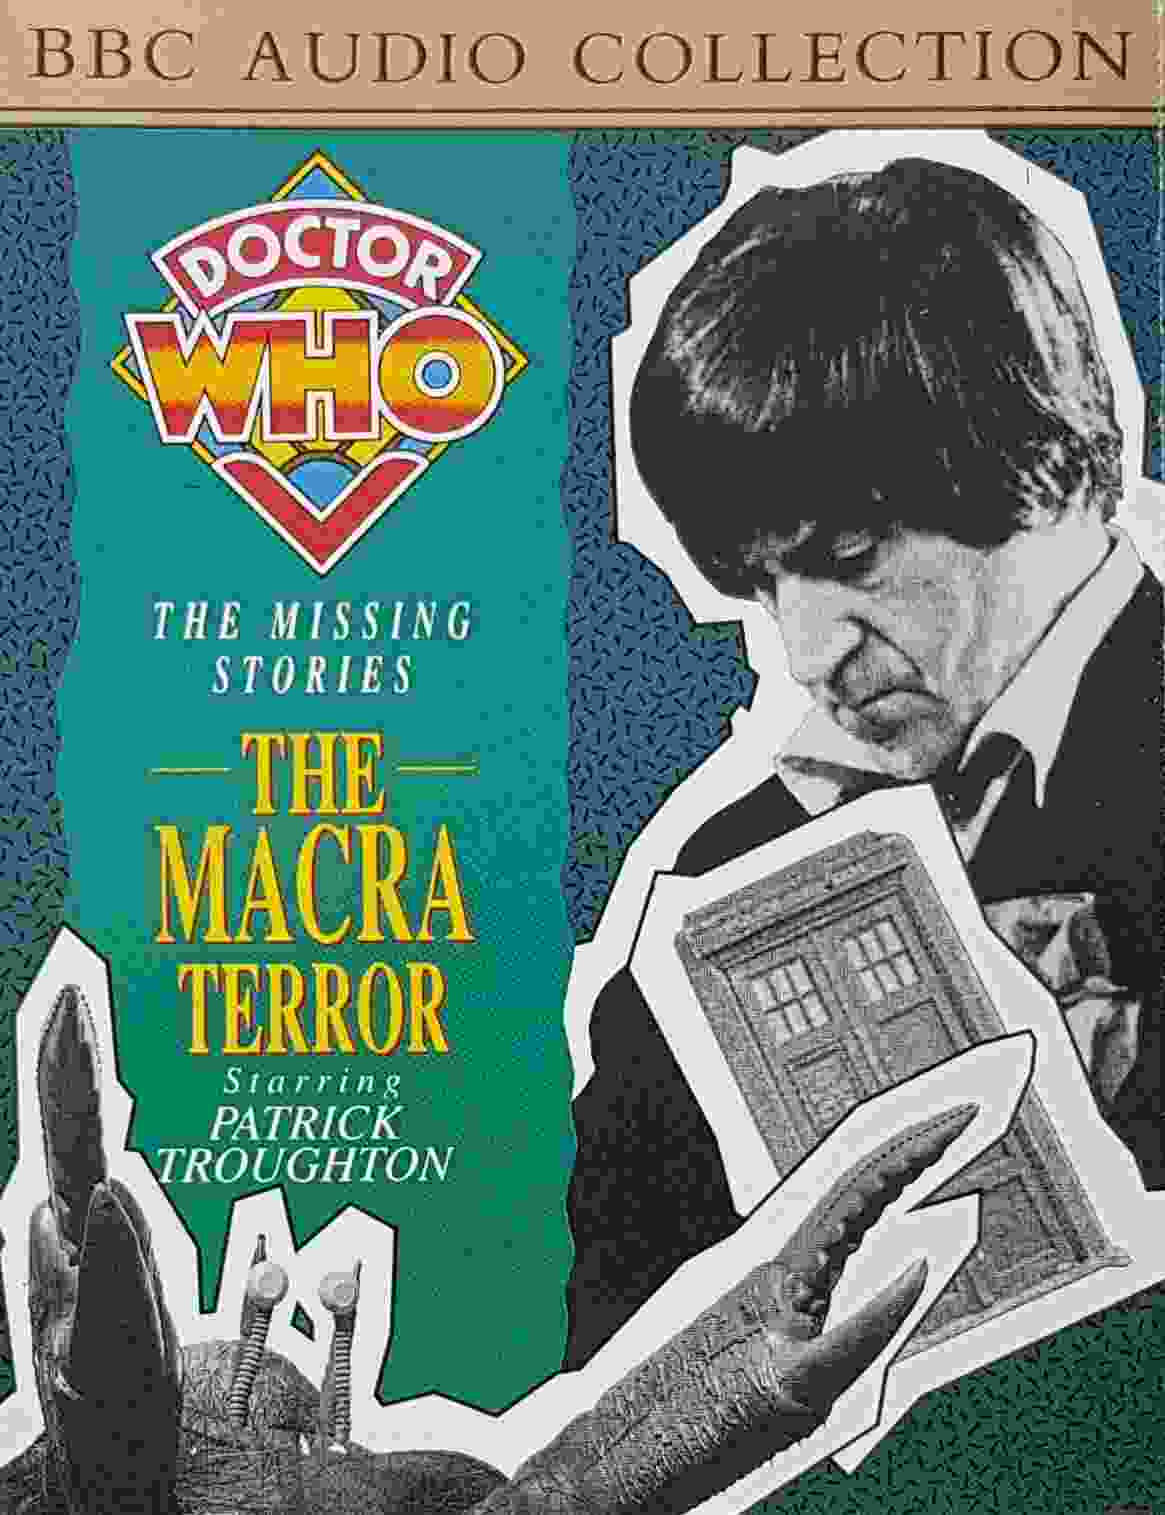 Picture of Doctor Who - The Macra terror by artist Ian Stuart Black from the BBC cassettes - Records and Tapes library